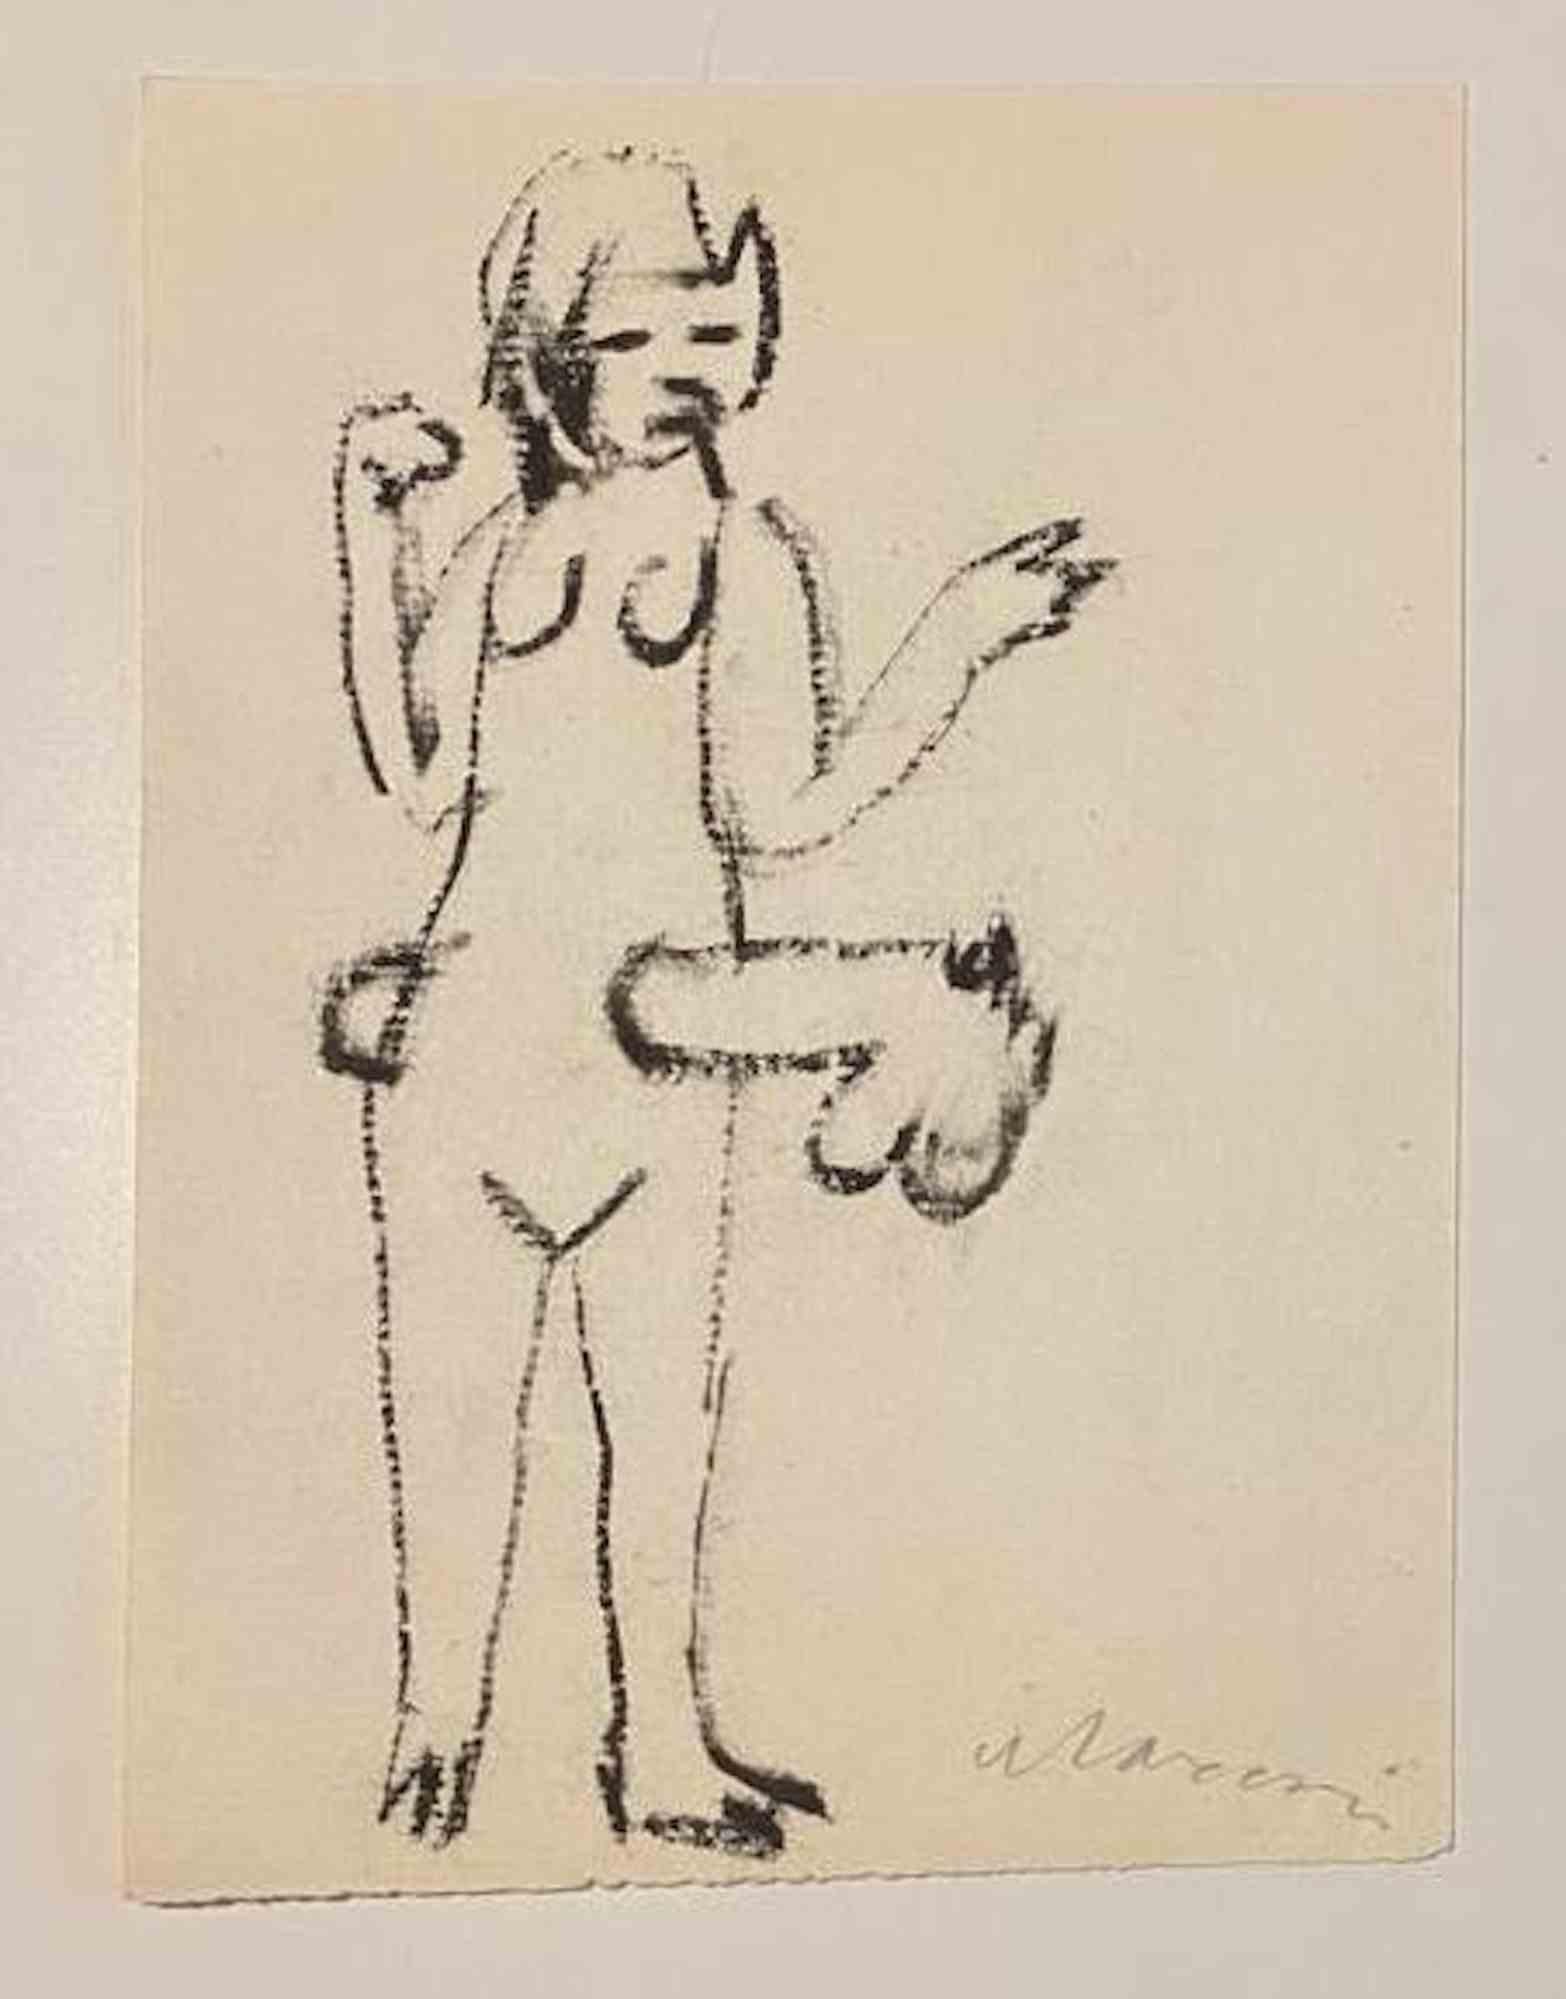 The Jab is a black marker Drawing realized by Mino Maccari  (1924-1989) in the Mid-20th Century.

Hand-signed on the lower.

Good conditions.

Mino Maccari (Siena, 1924-Rome, June 16, 1989) was an Italian writer, painter, engraver and journalist,